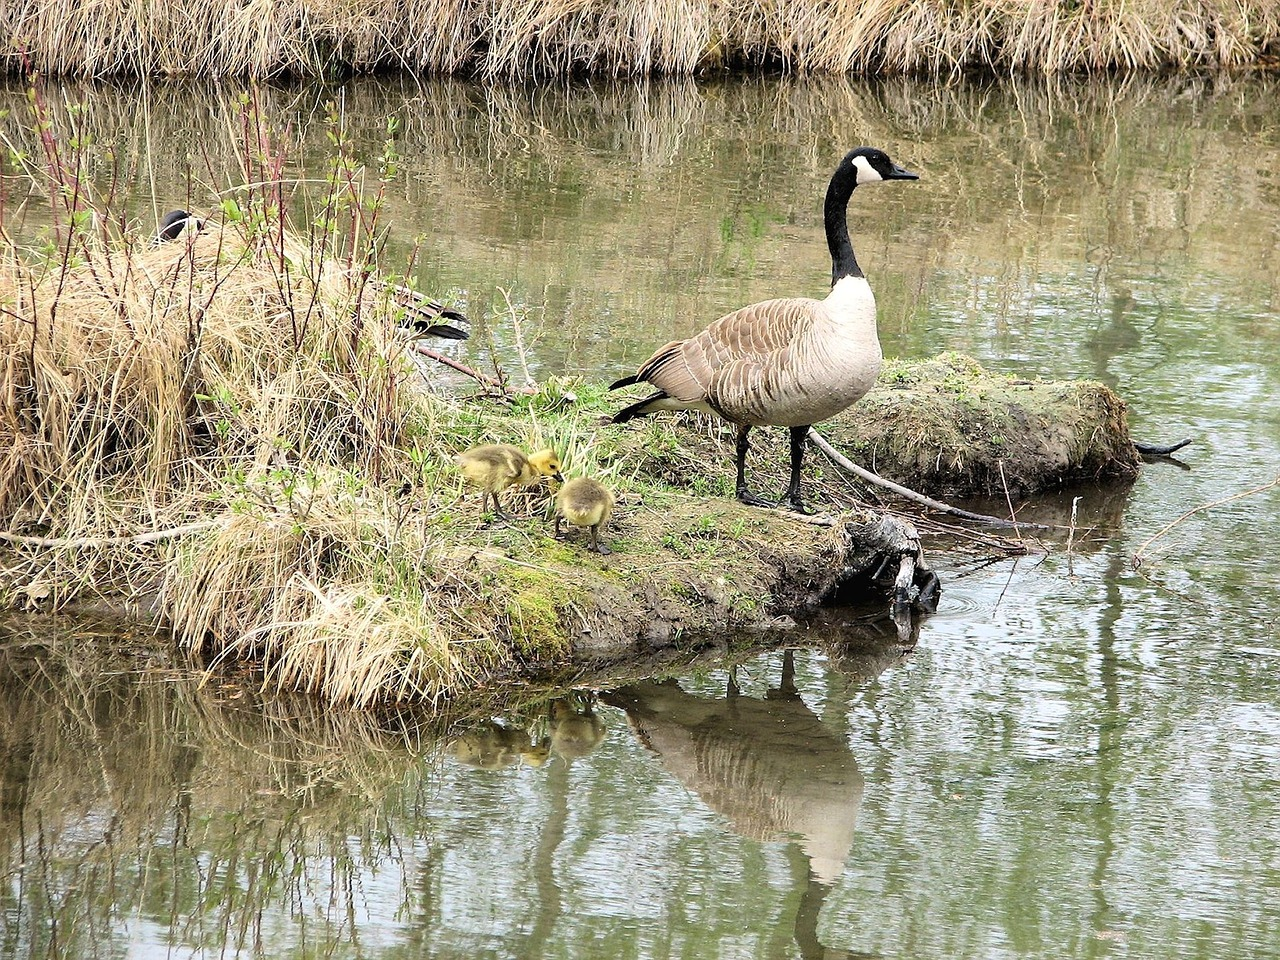 Are Canada geese protected in their habitat